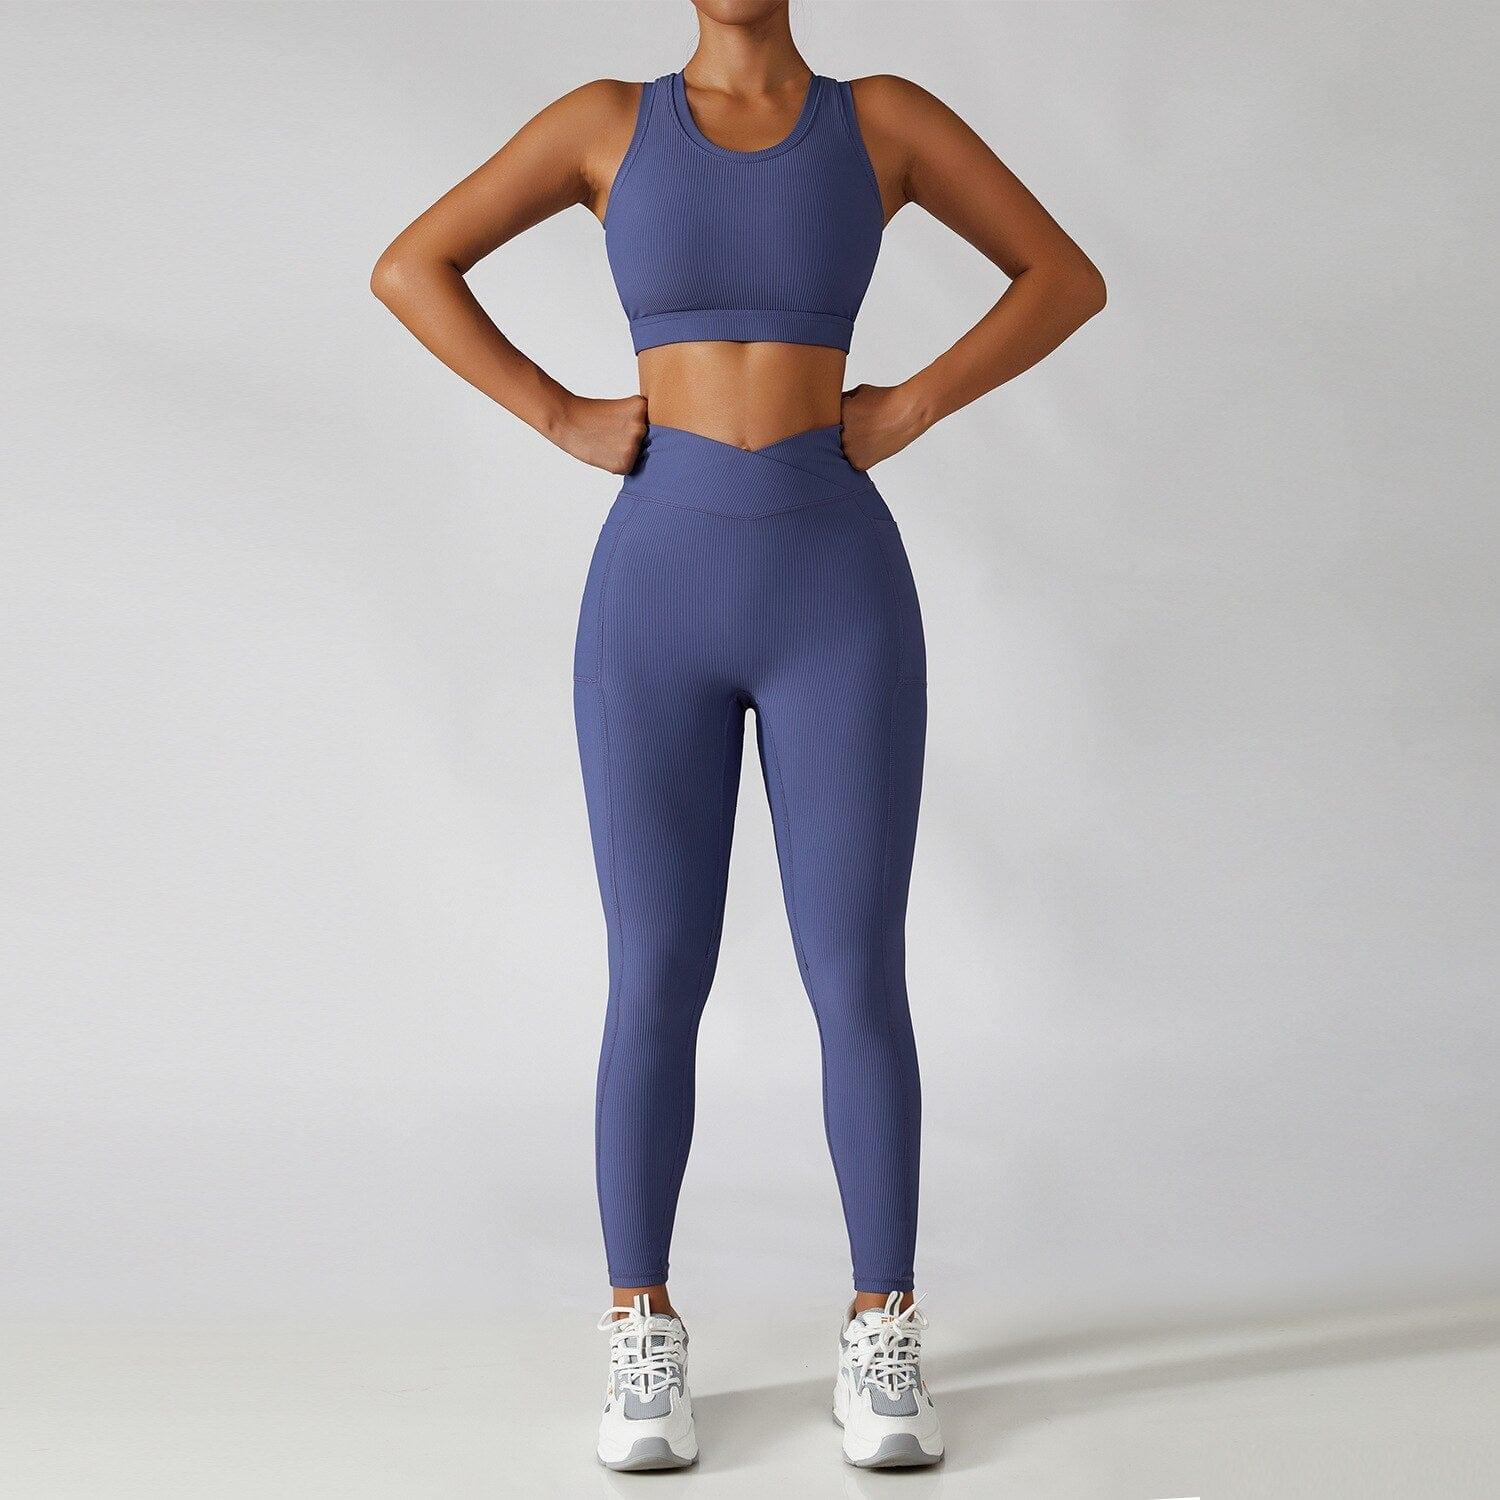 Shop 0 2 Pieces Seamless Women Tracksuit  Yoga Set Running Workout Sportswear Gym Clothes Fitness Bra High Waist Leggings Sports Suit Mademoiselle Home Decor